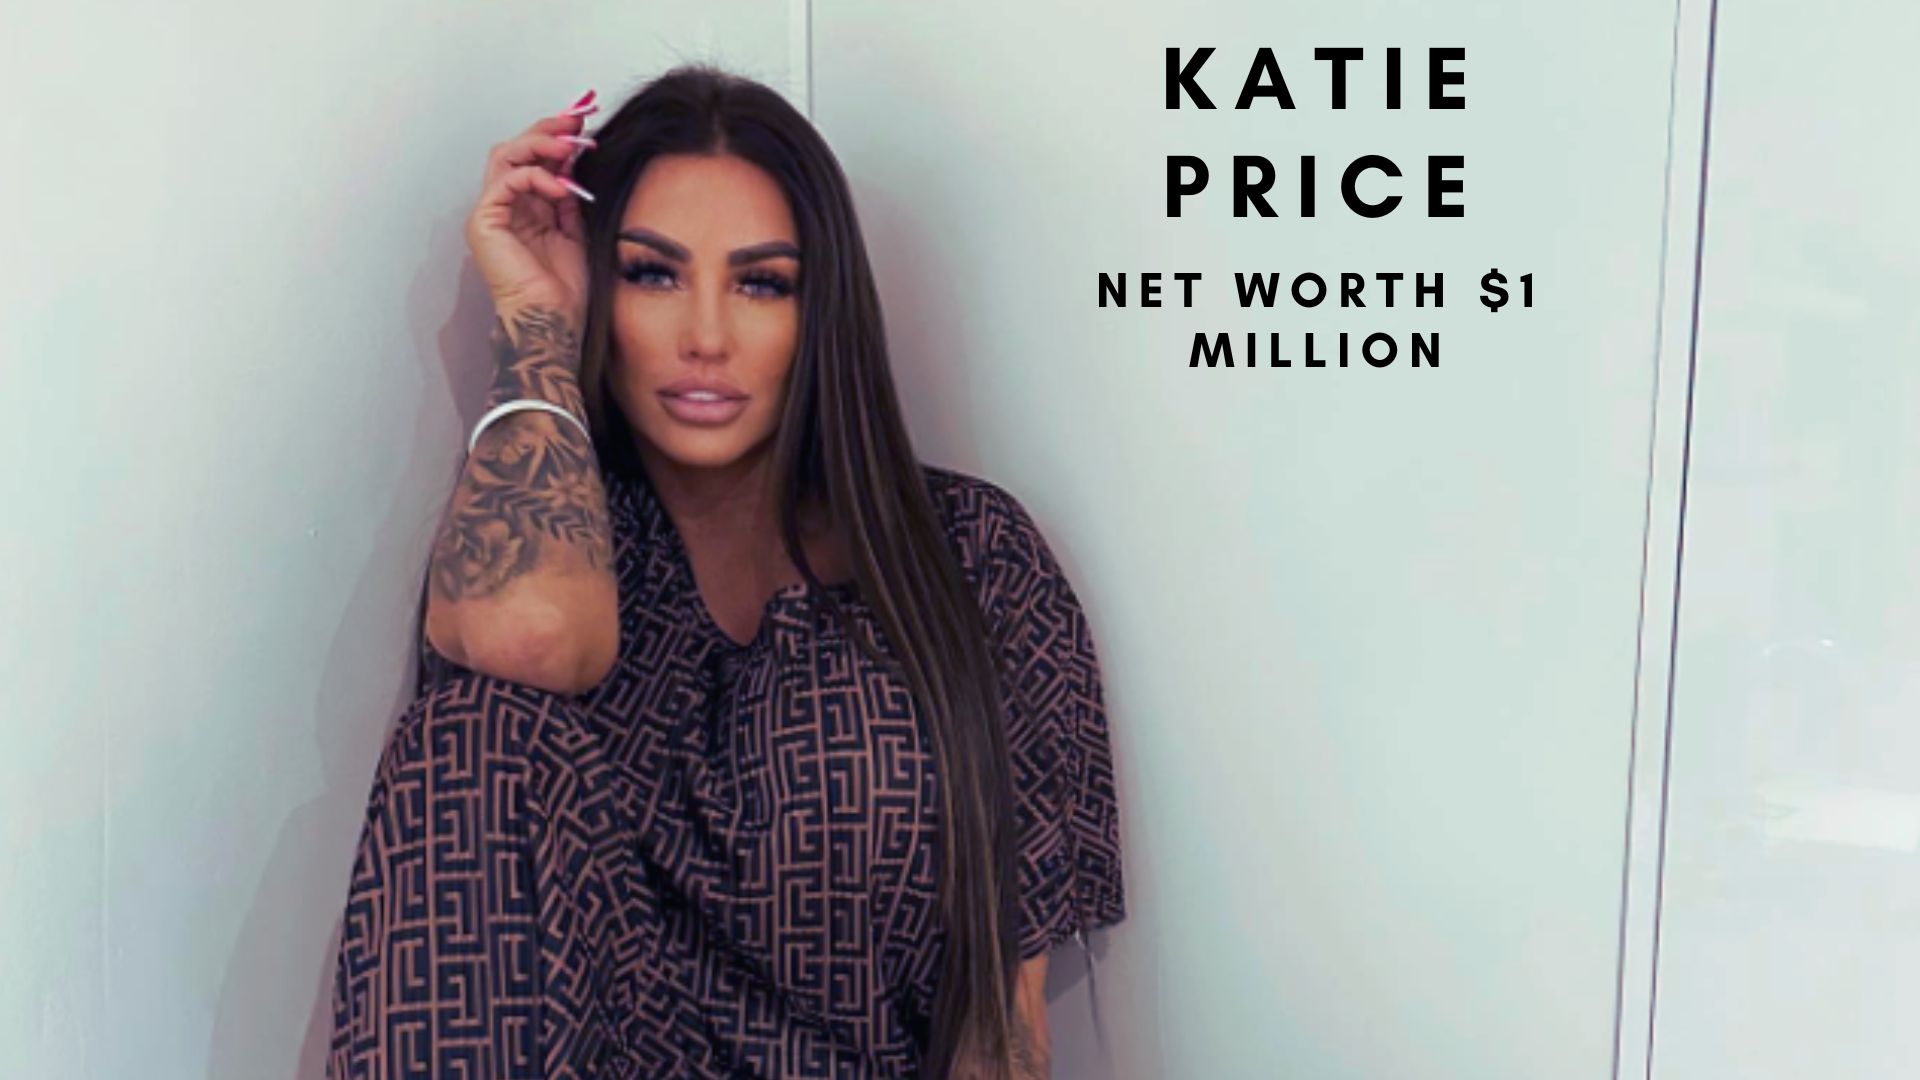 Katie Price's net worth is predicted to be around $1 million as of April 2023. (Credits: @katieprice Instagram)